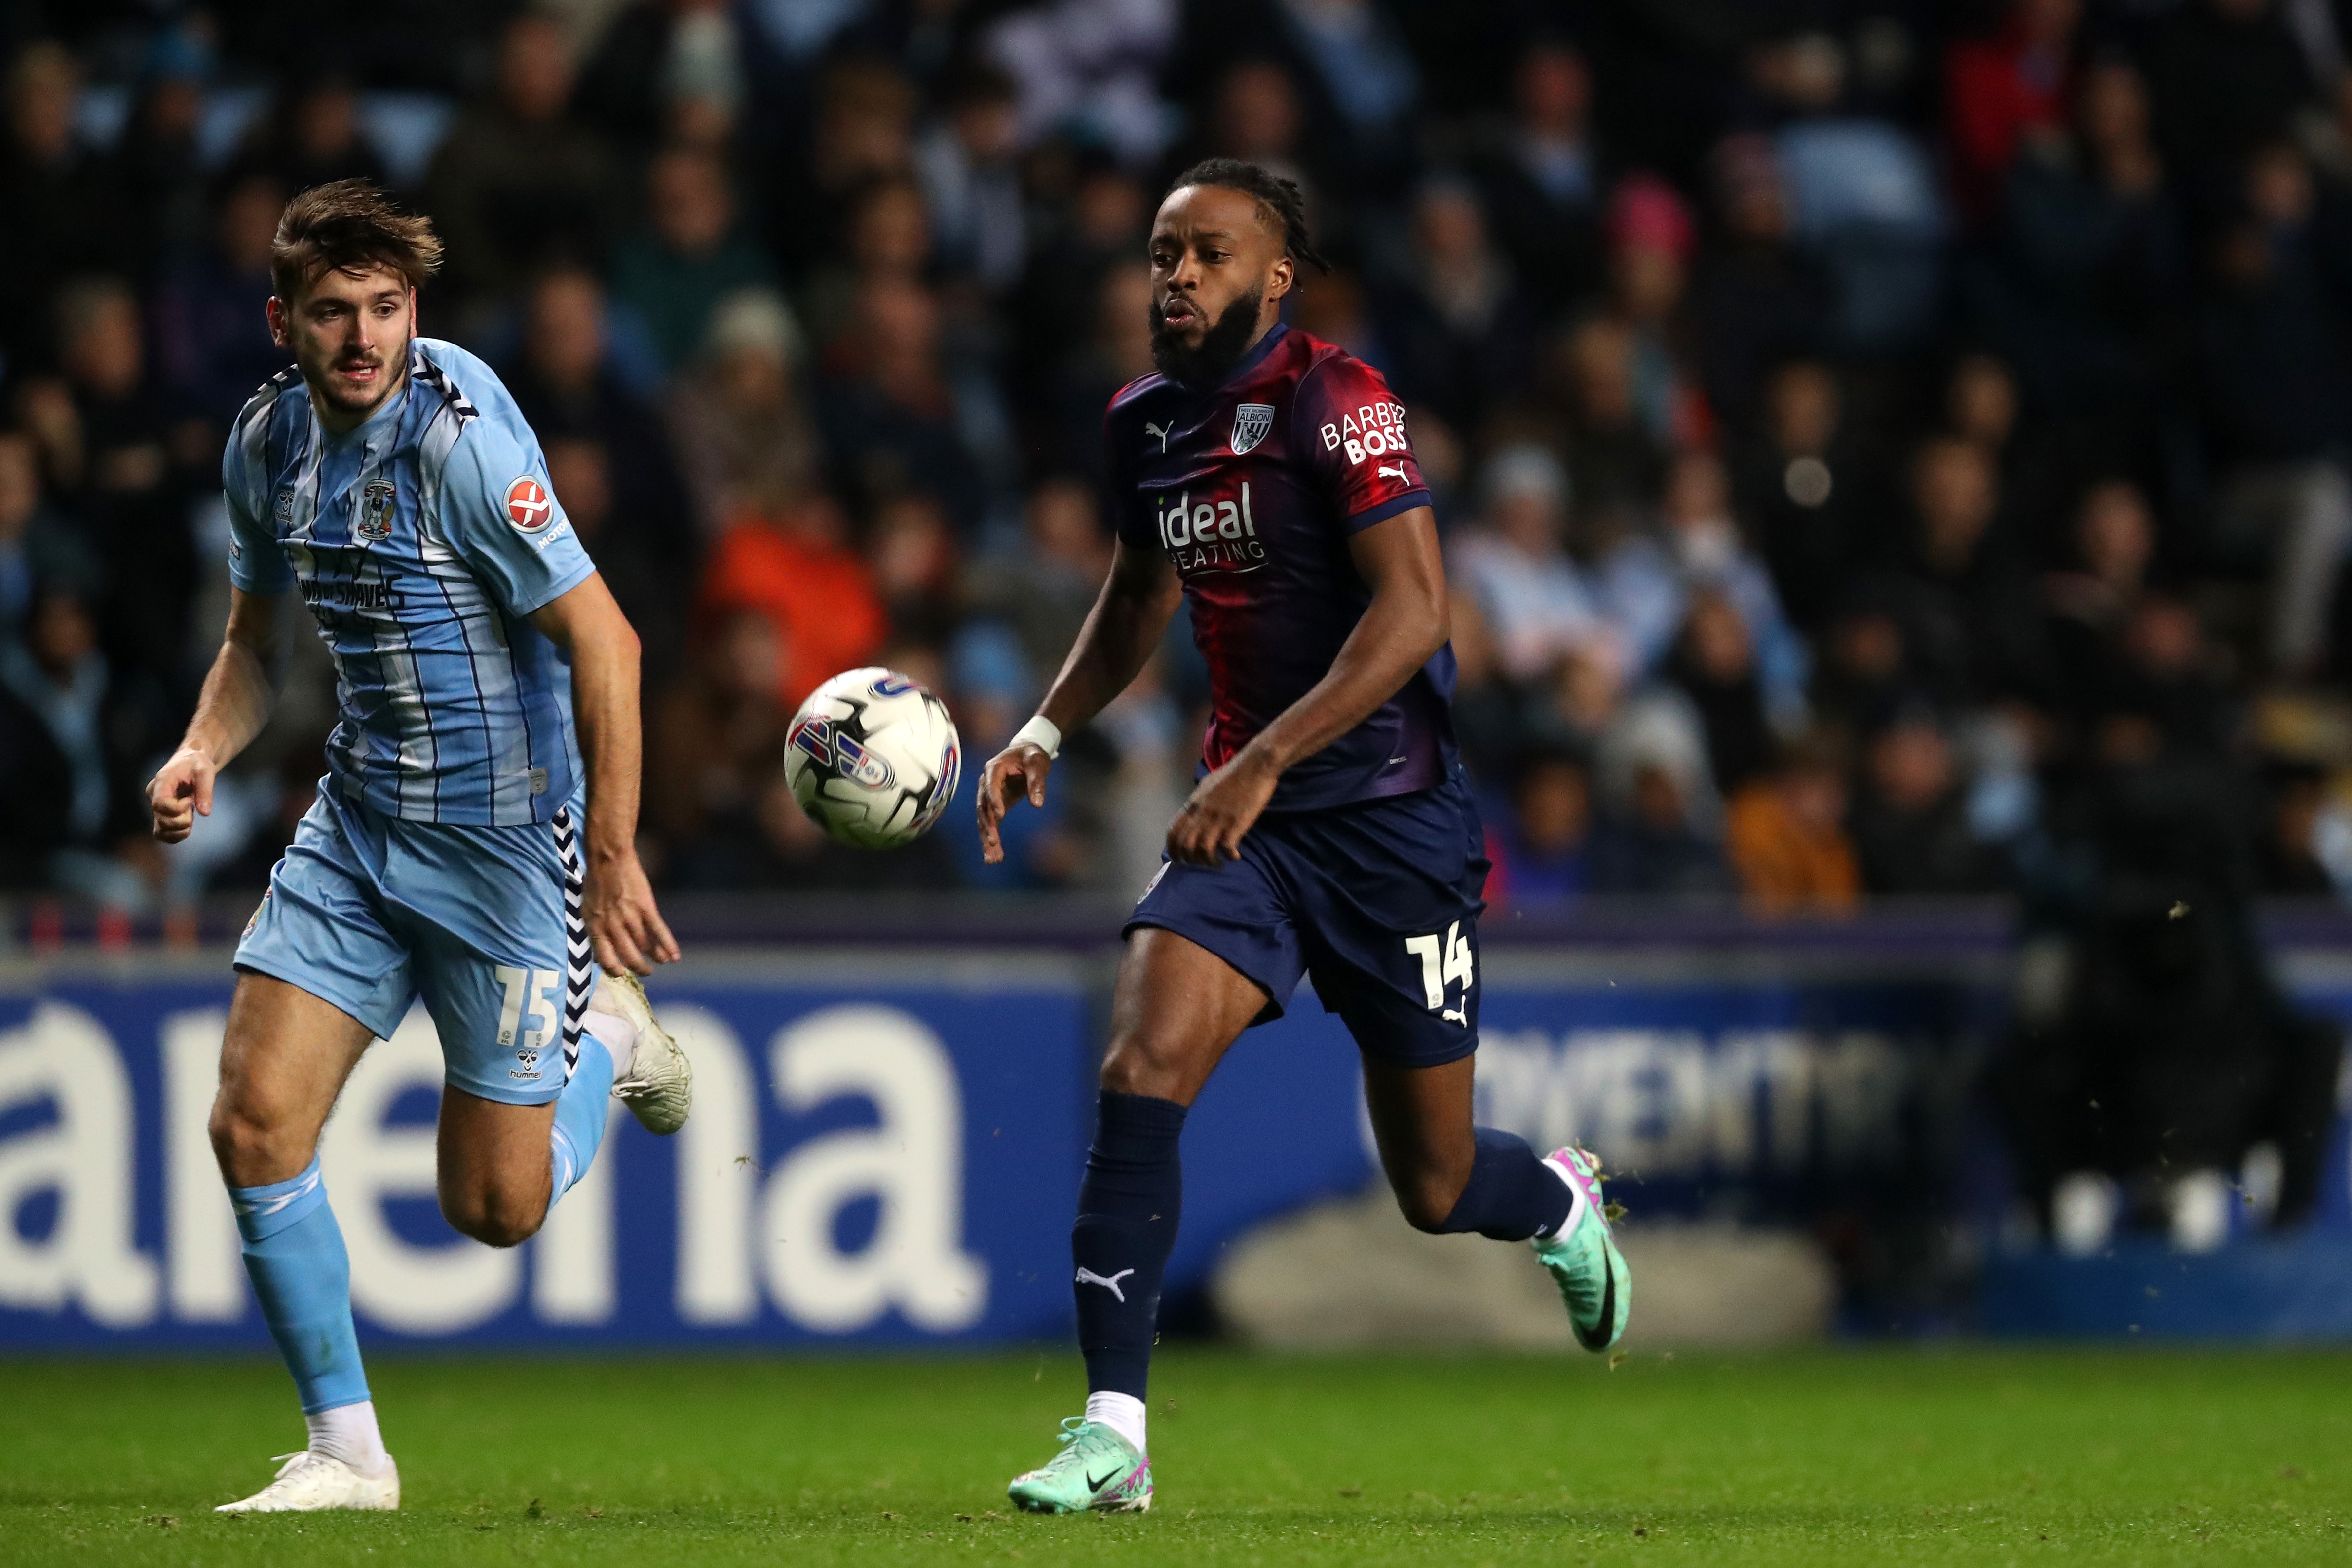 Nathaniel Chalobah chases the ball against Coventry